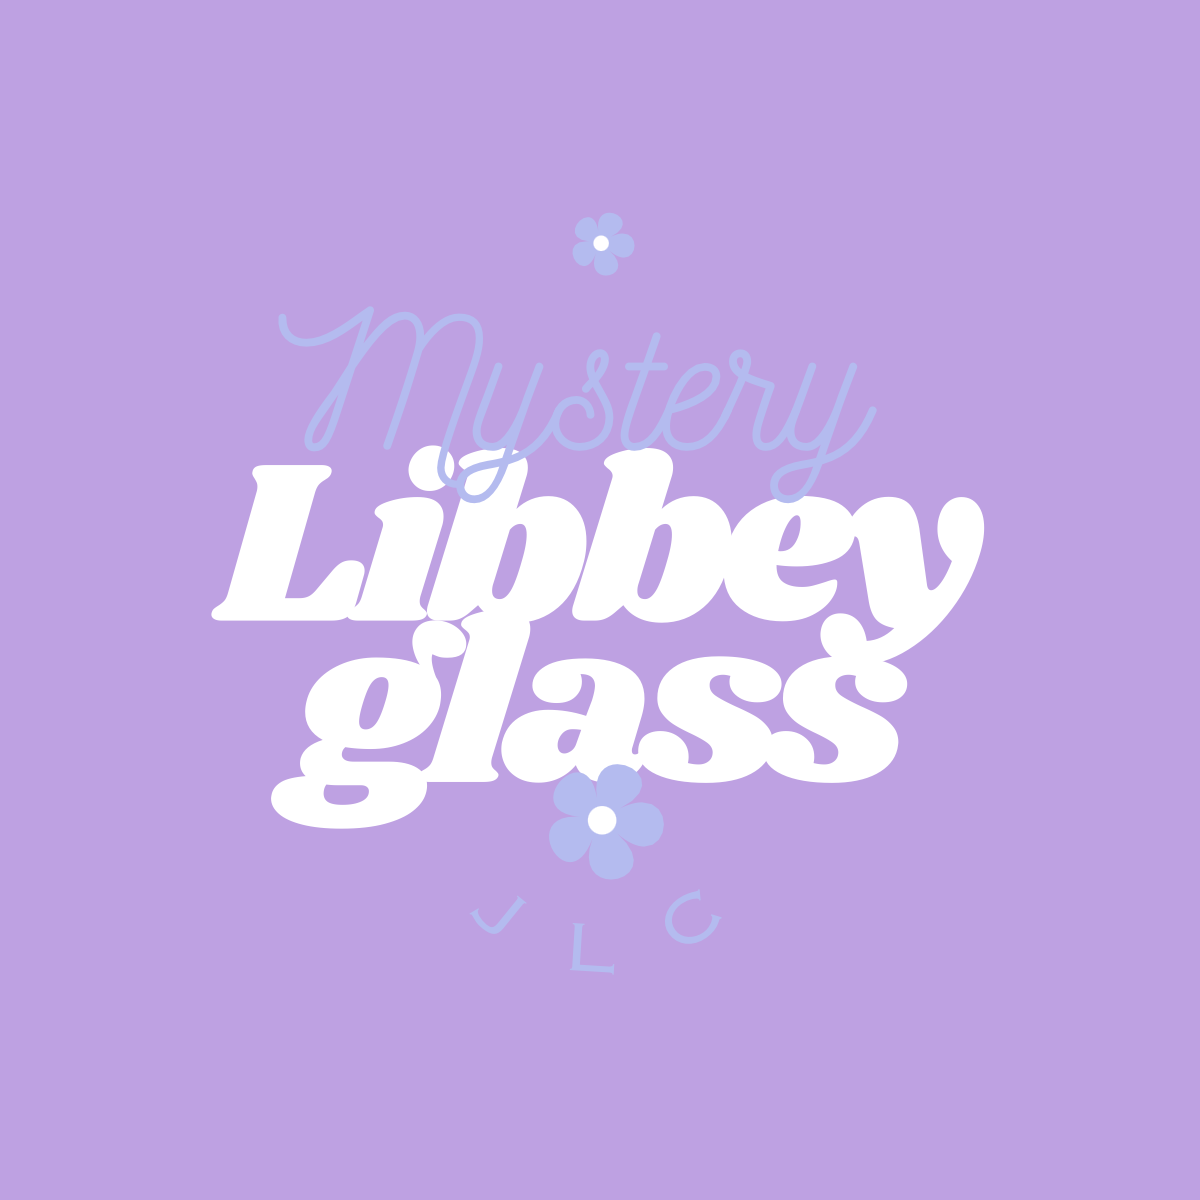 MYSTERY LIBBEY | GLASS CUP